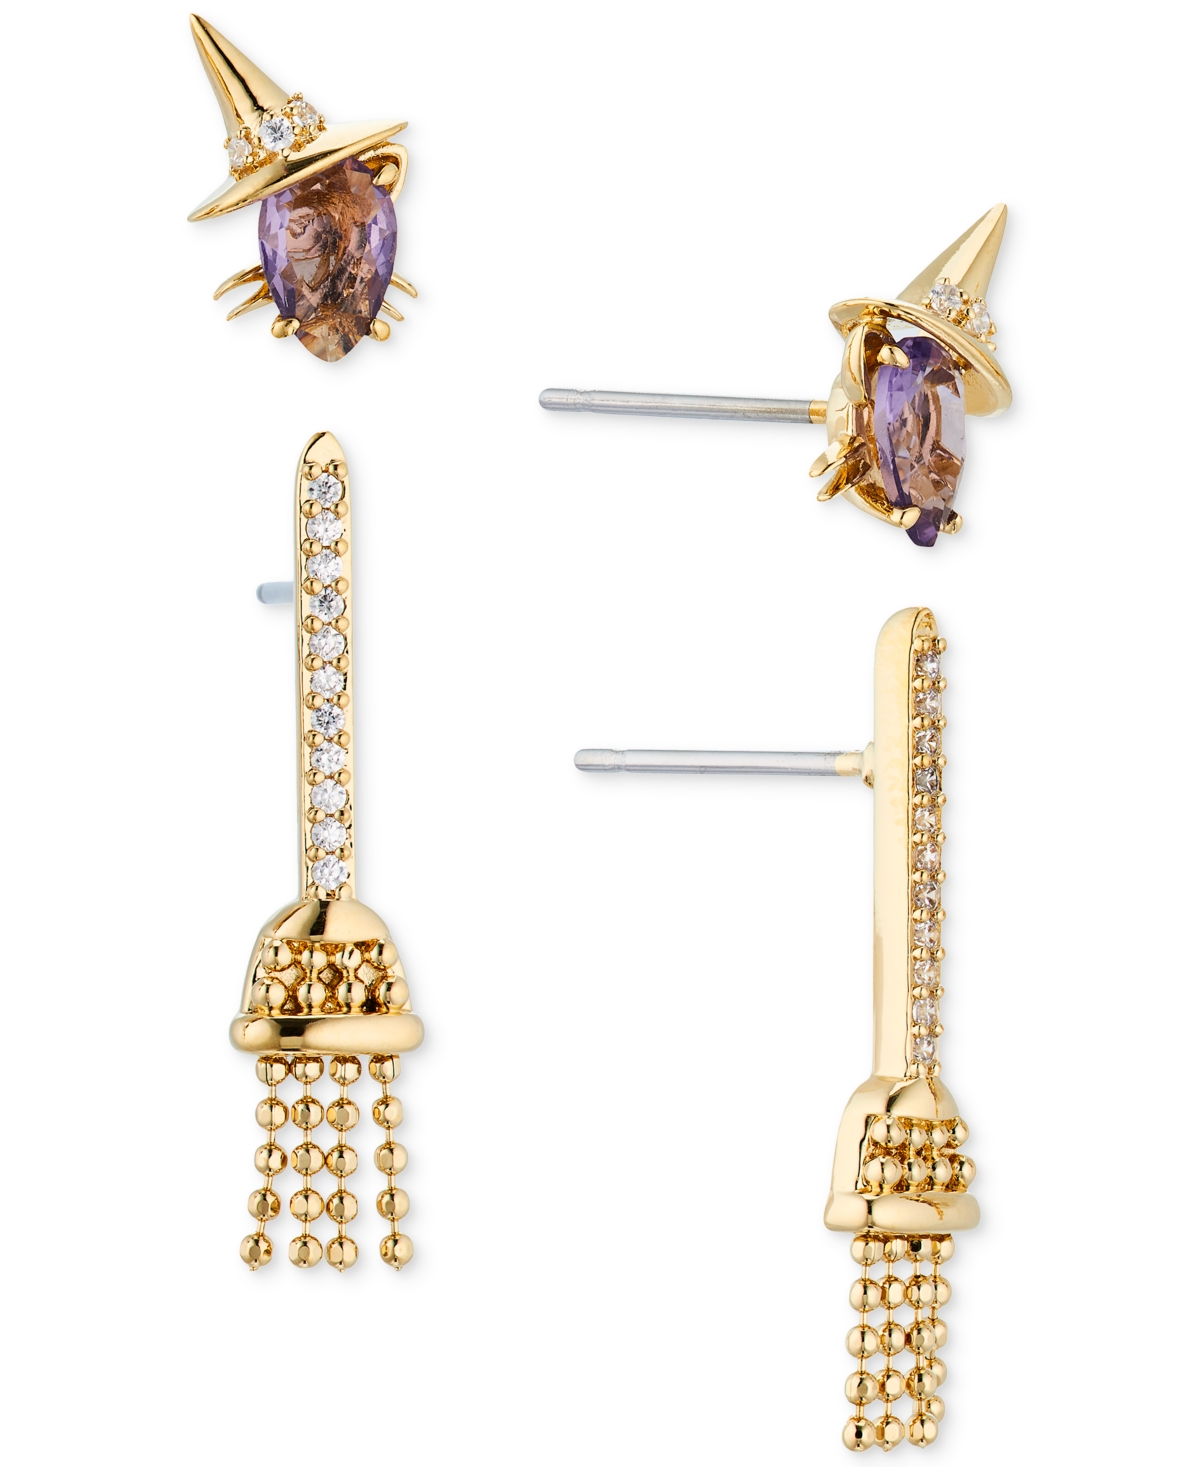 18k Gold-Plated 2-Pc. Set Mixed Stone Witch Cat & Broomstick Earrings - Gold